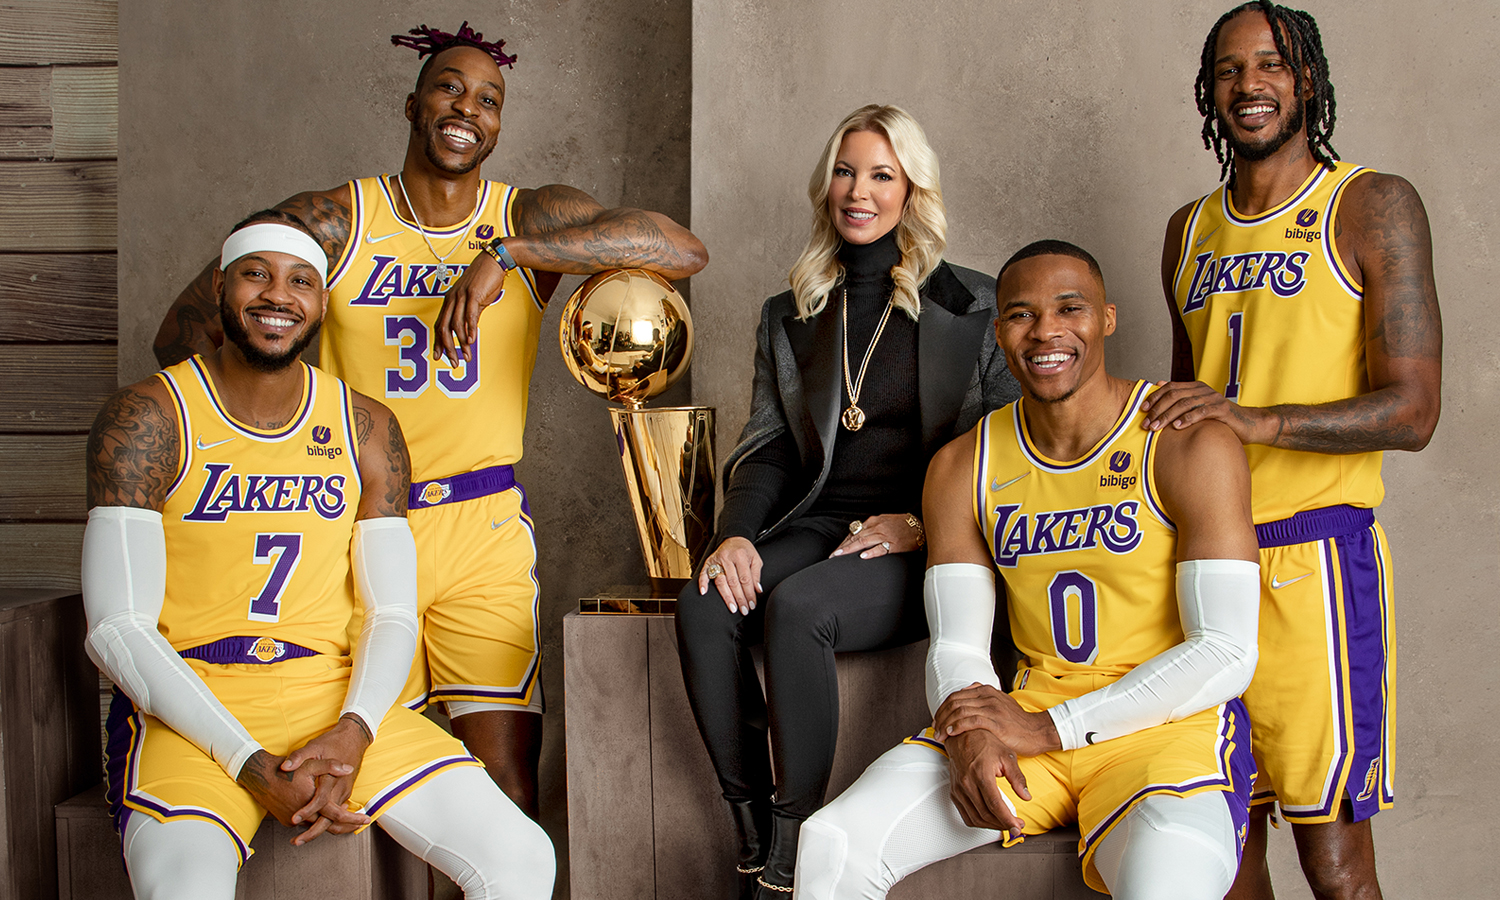 Exclusive: Lakers' Jeanie Buss on LeBron James: 'He will have his